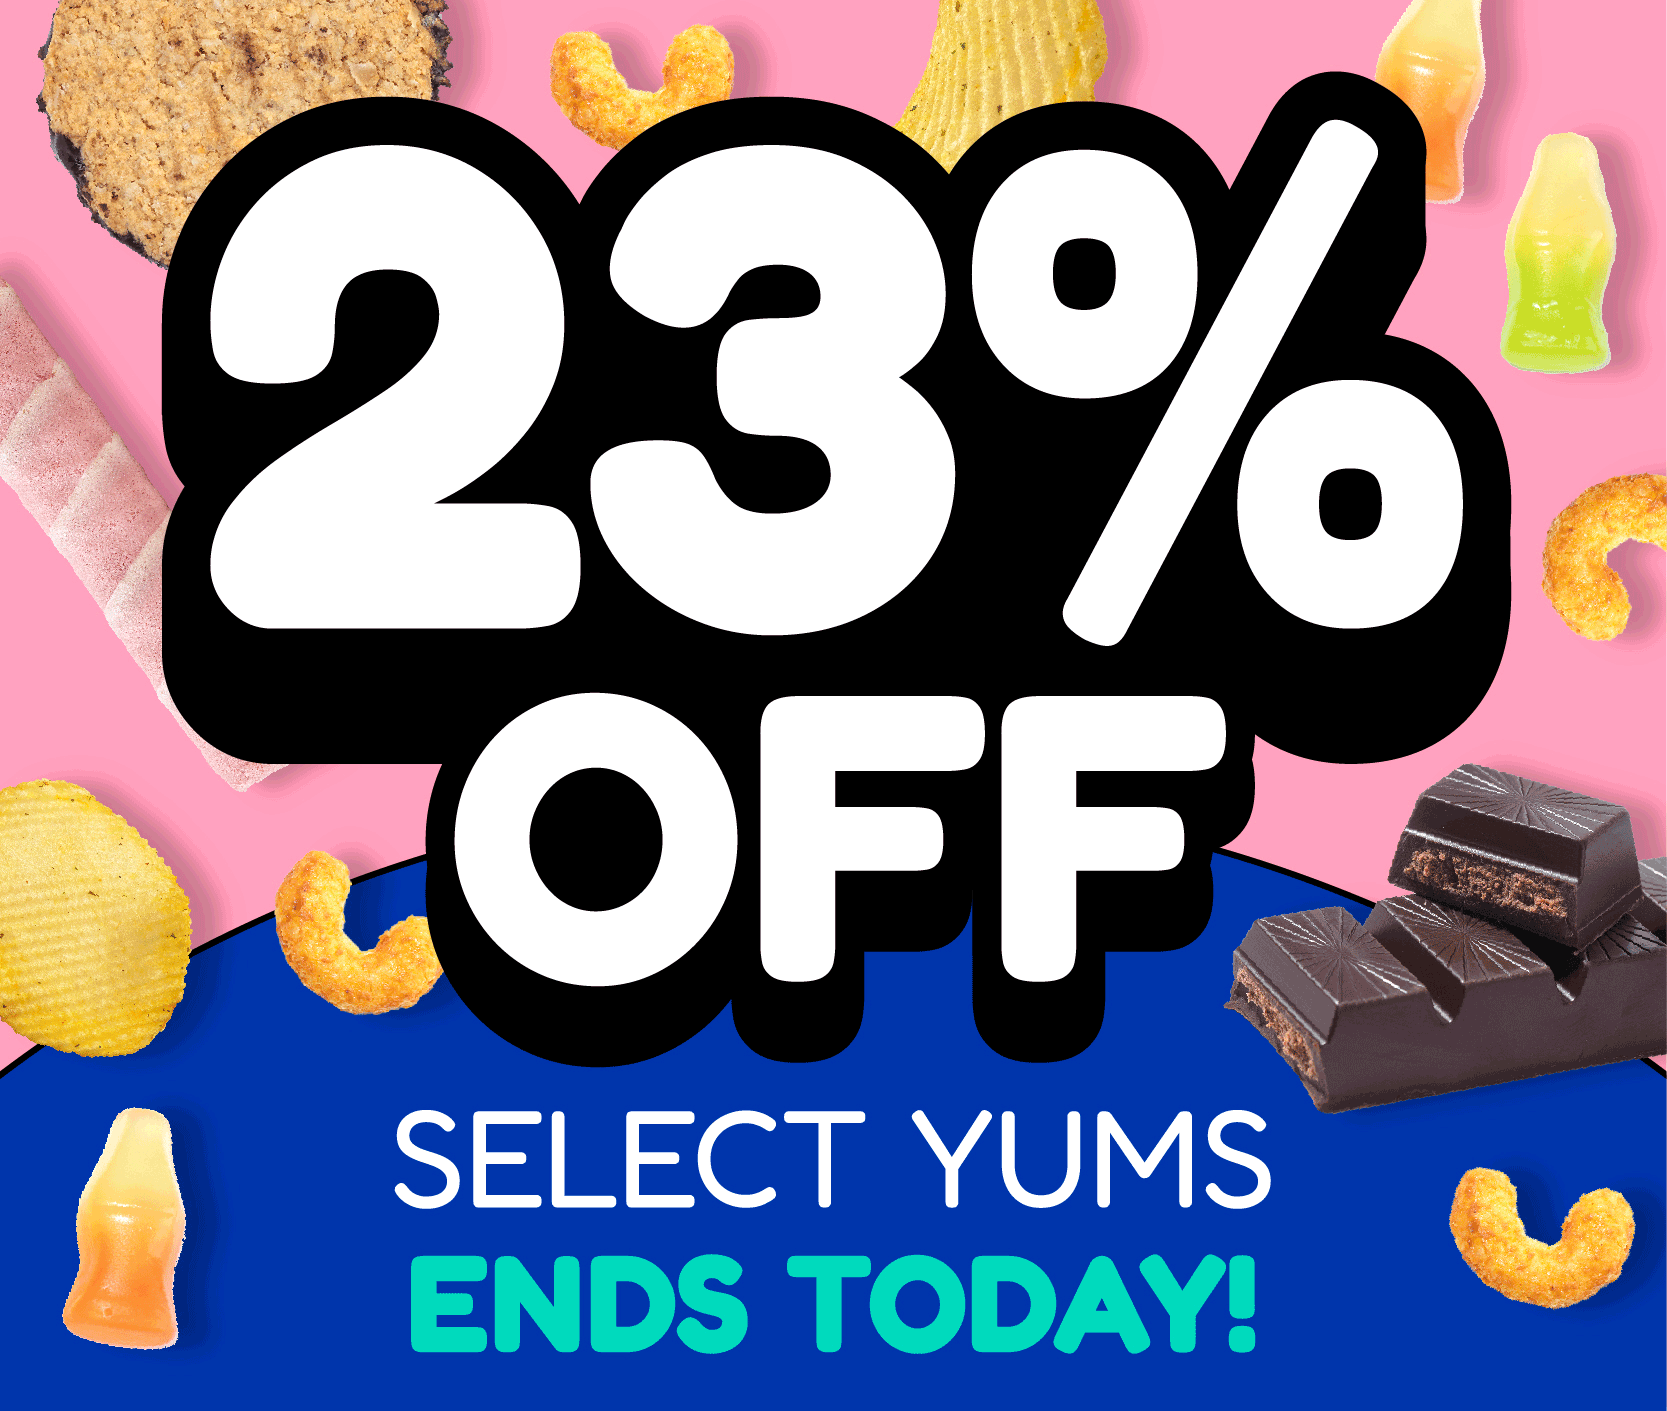 23% OFF SELECT YUMS ENDS TODAY!